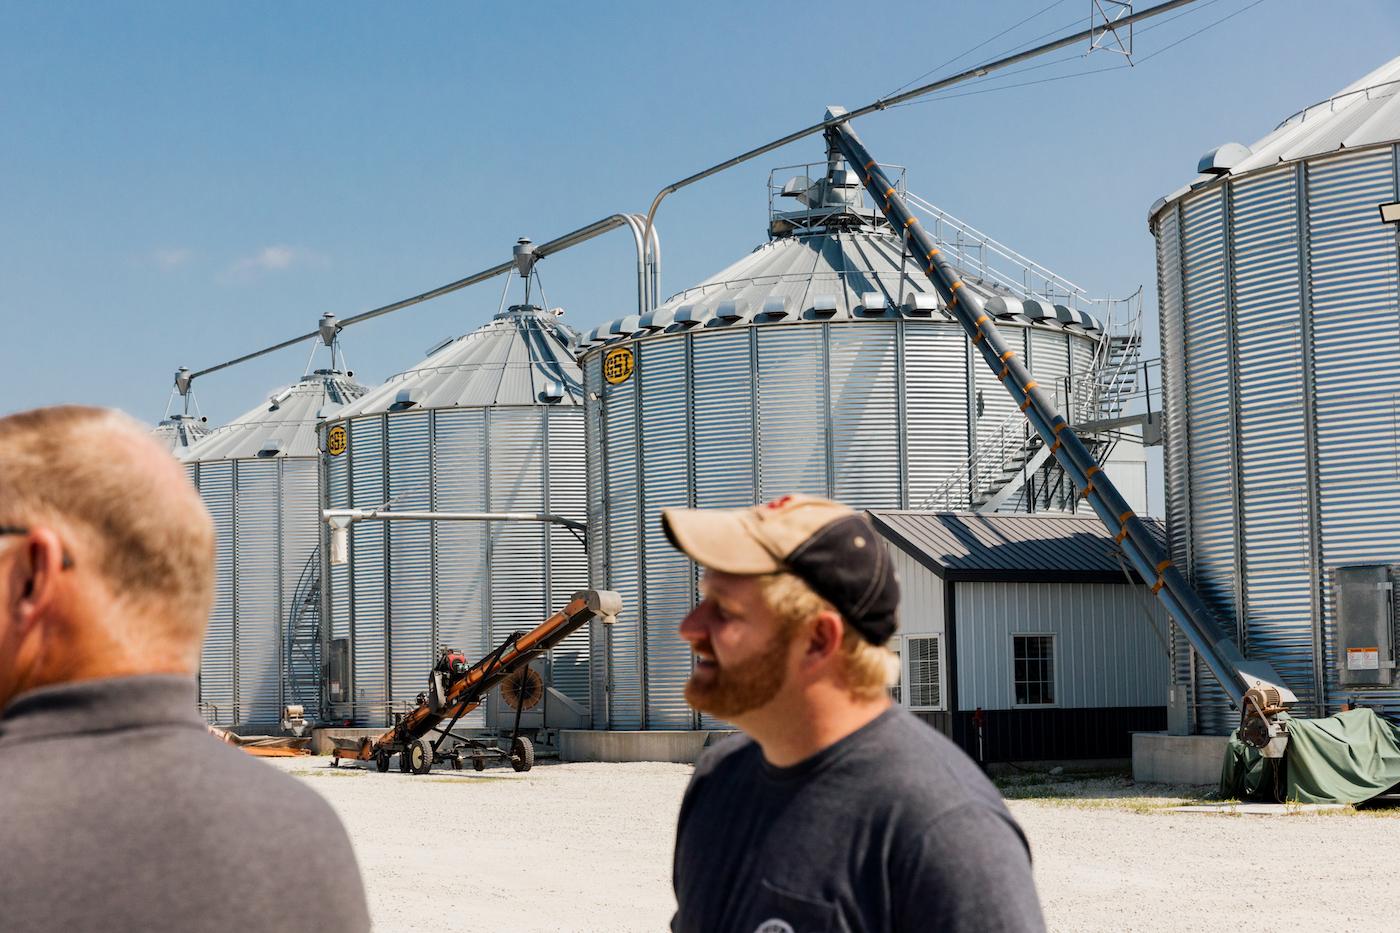 Harold and Ross Wilken stand in front of large grain bins on their farm